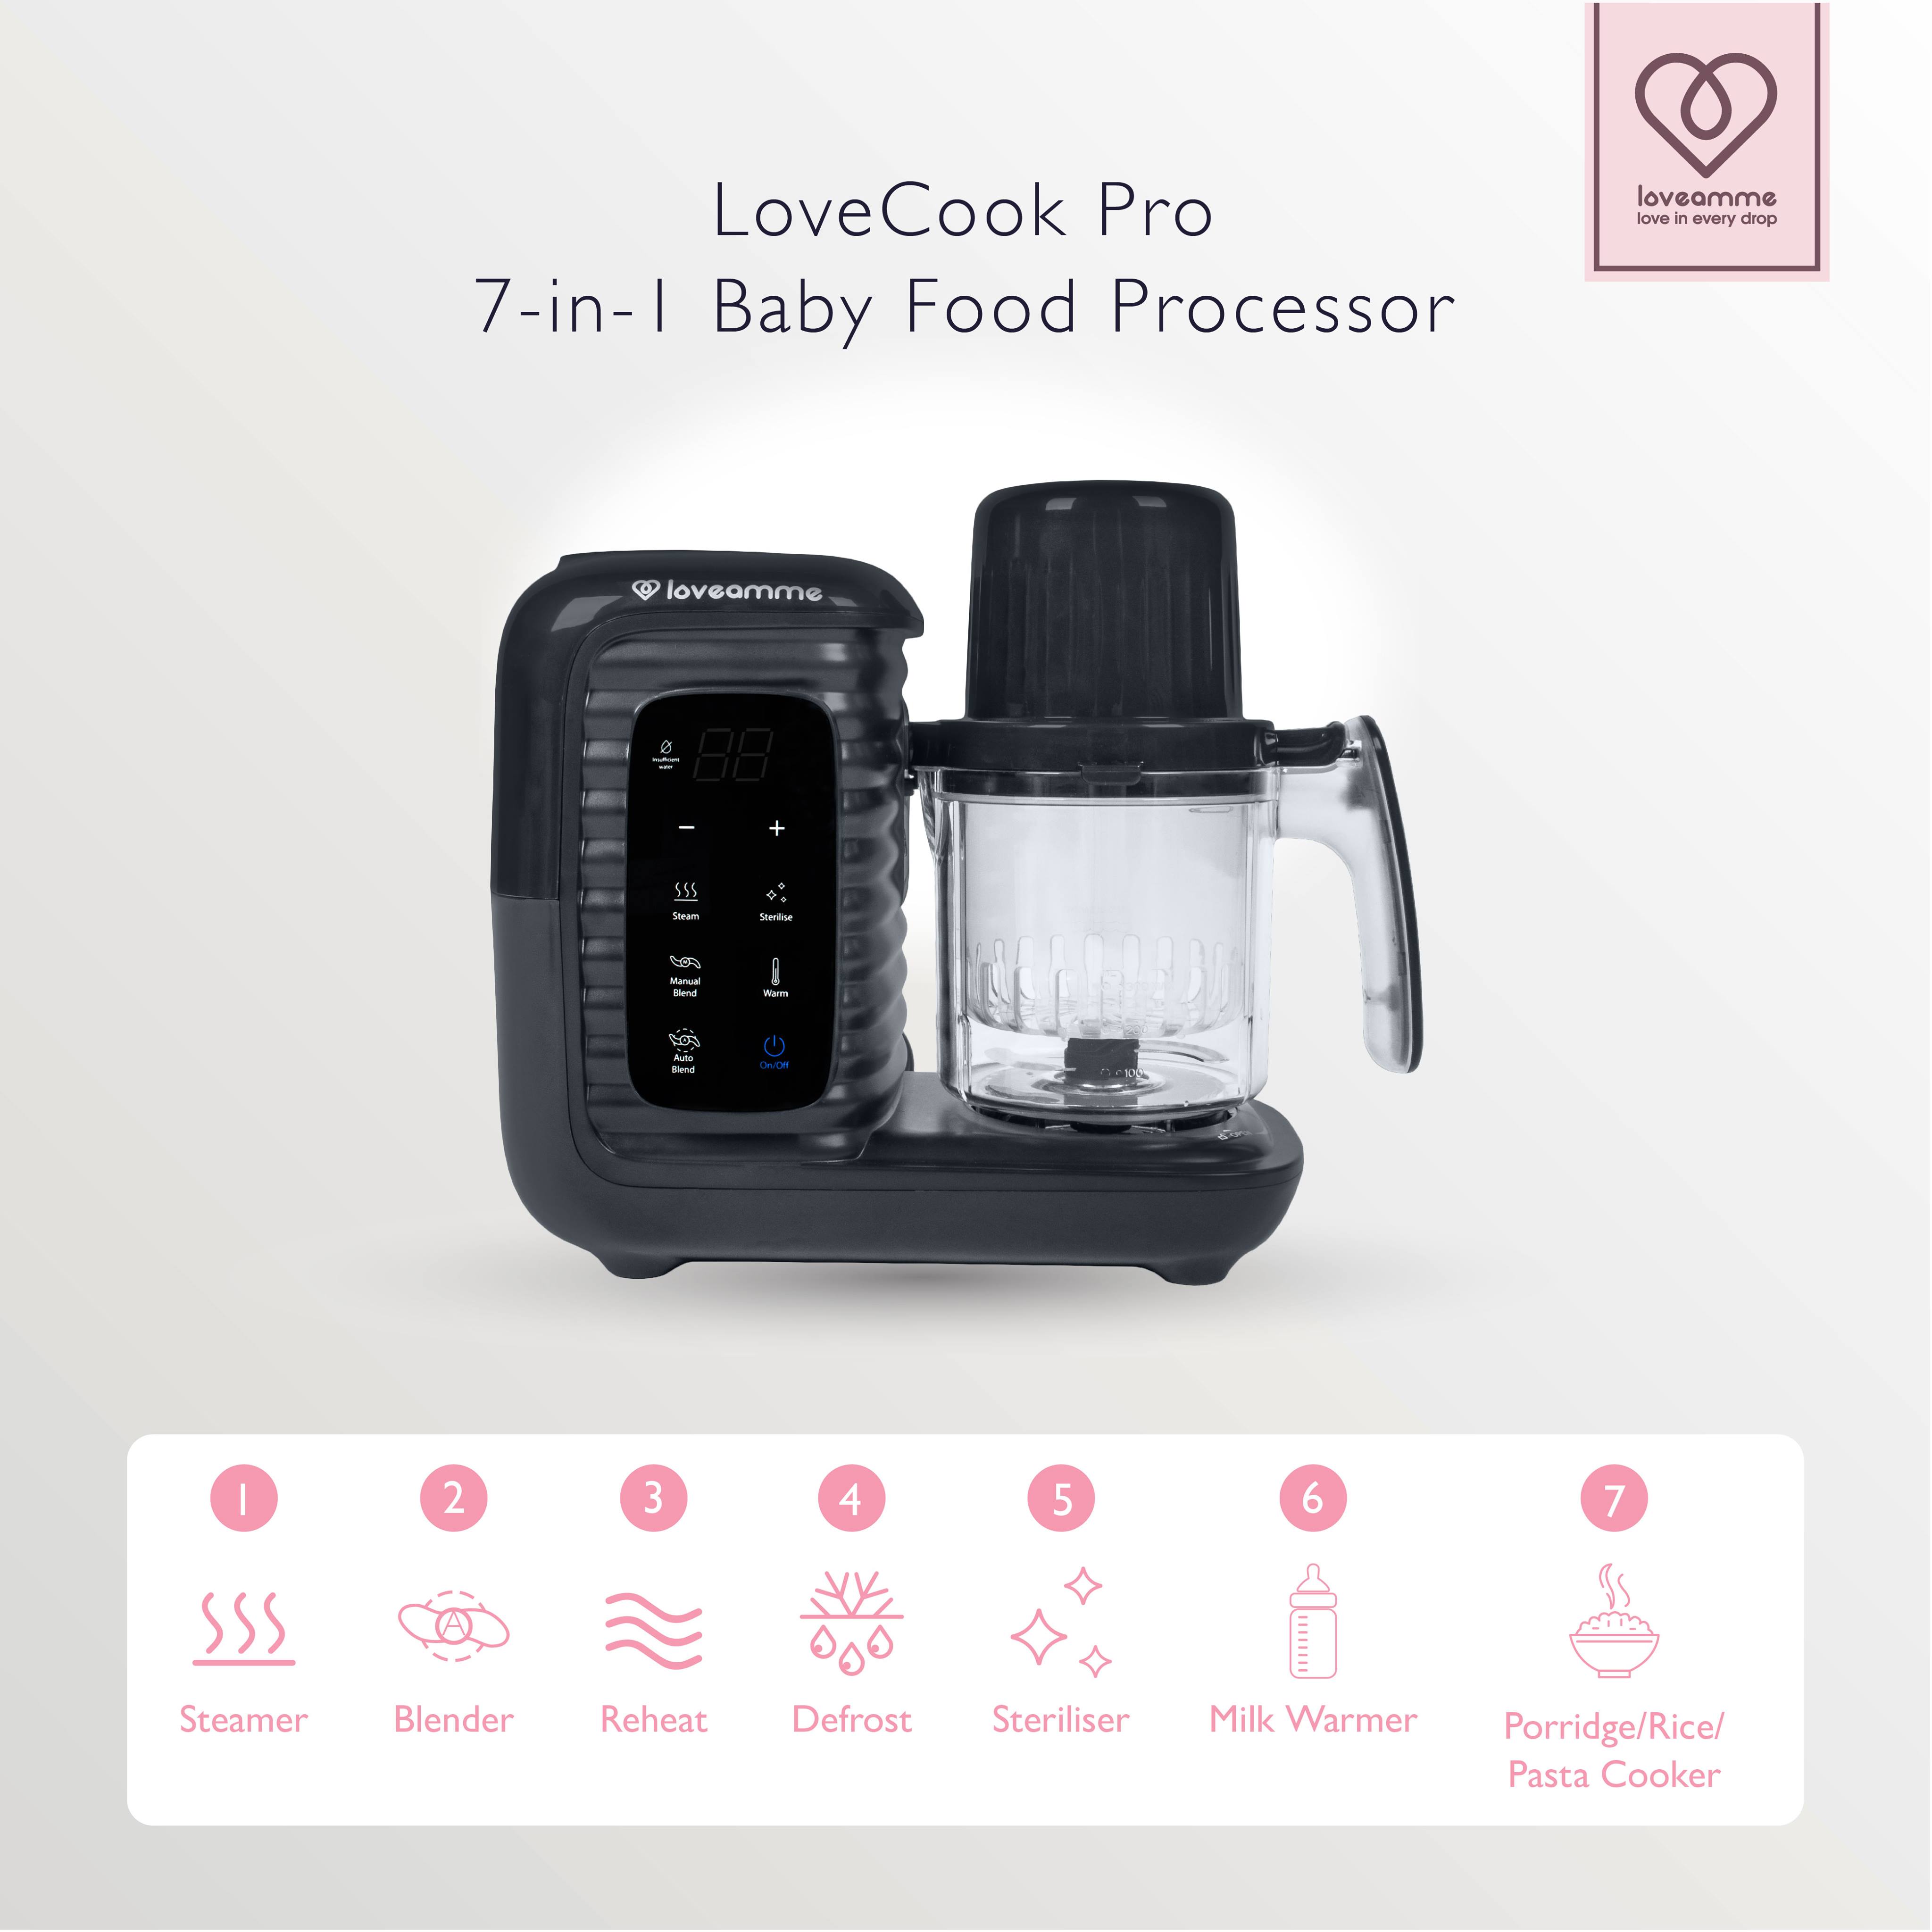 Loveamme lovecook pro food processor for baby with 7 in 1 functions includes steaming, blending, reheating, sterilising, defrosting, milk warmer, pasta porridge and rice cooker